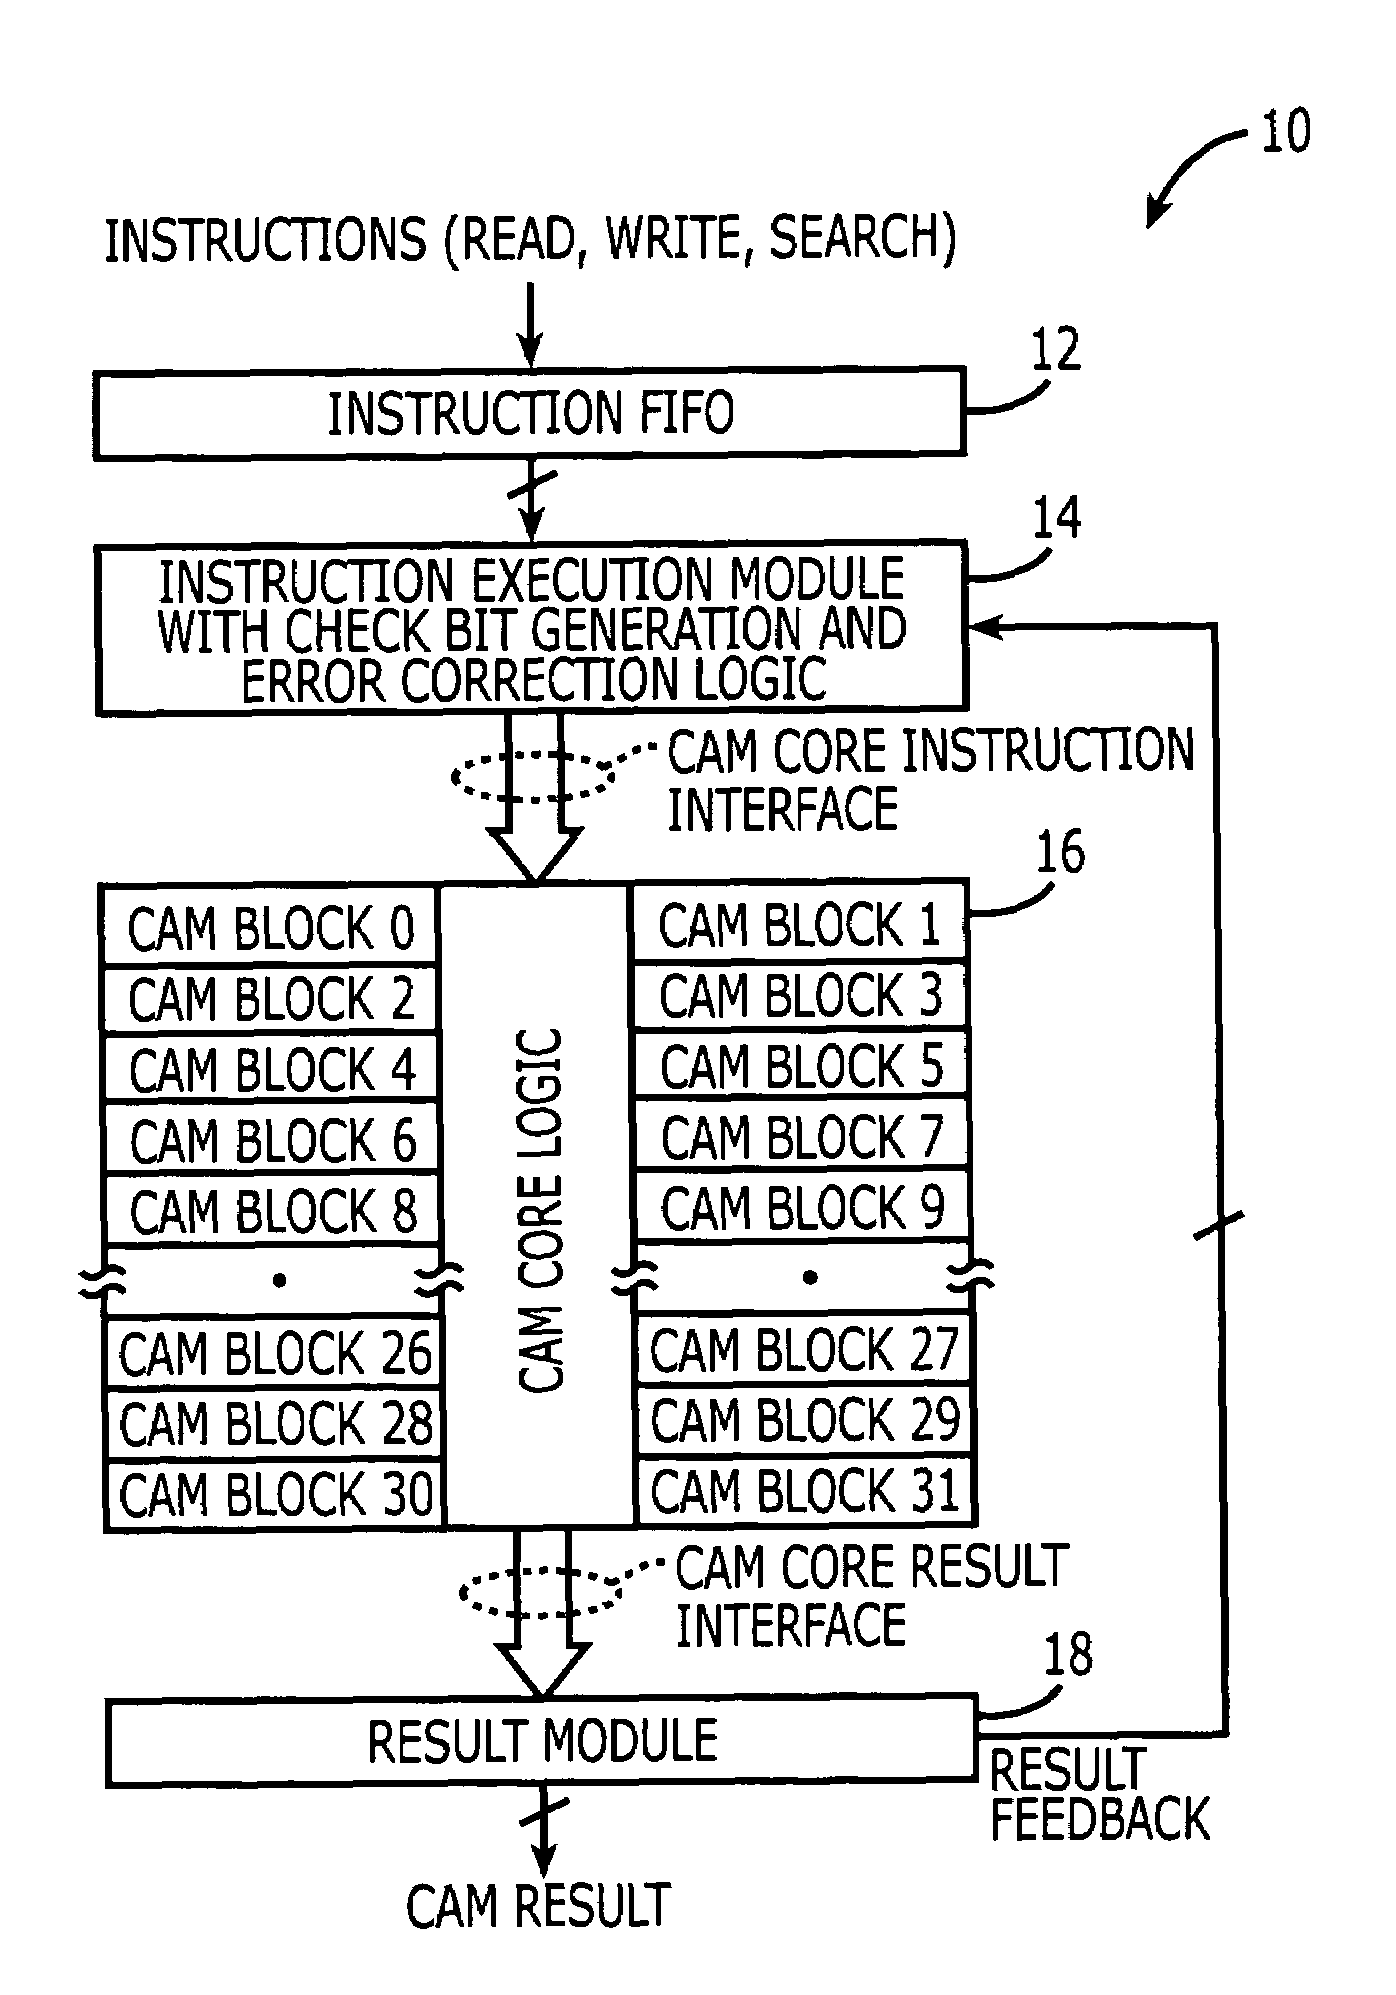 Content addressable memory (CAM) devices having multi-block error detection logic and entry selective error correction logic therein